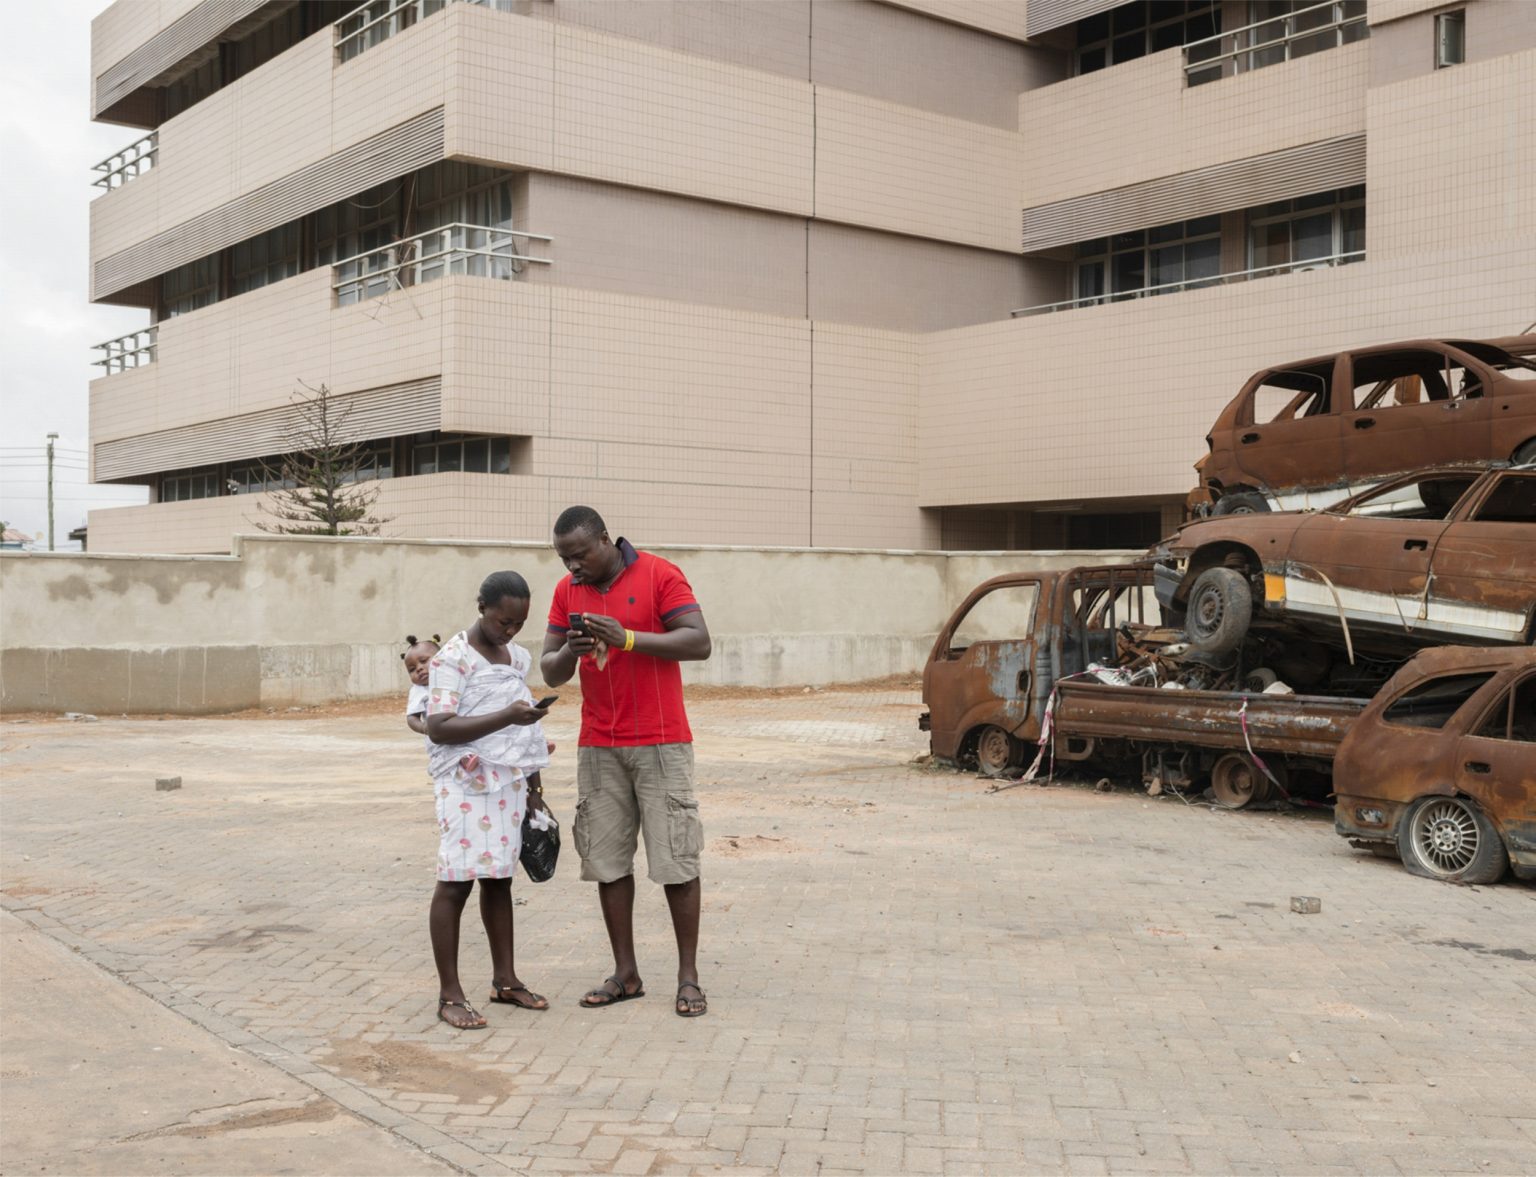 Republic of Ghana, Accra, September 2016: a street scene in the district of Adabraka.*Stitched photograph*